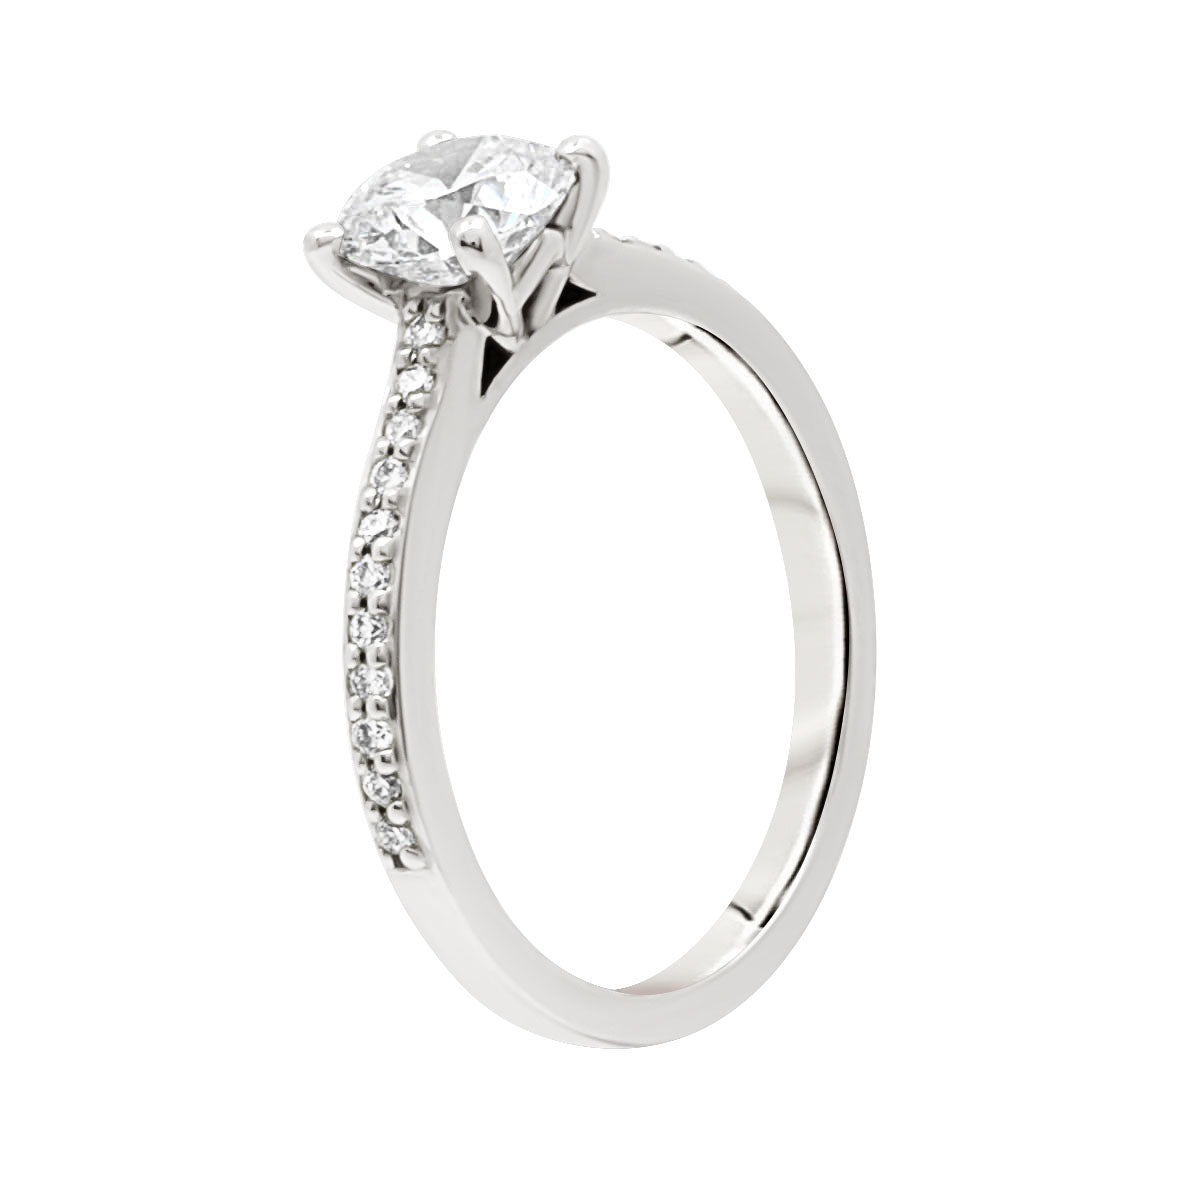 Solitaire with Diamond Shoulders in platinum 950 upright from an angled position